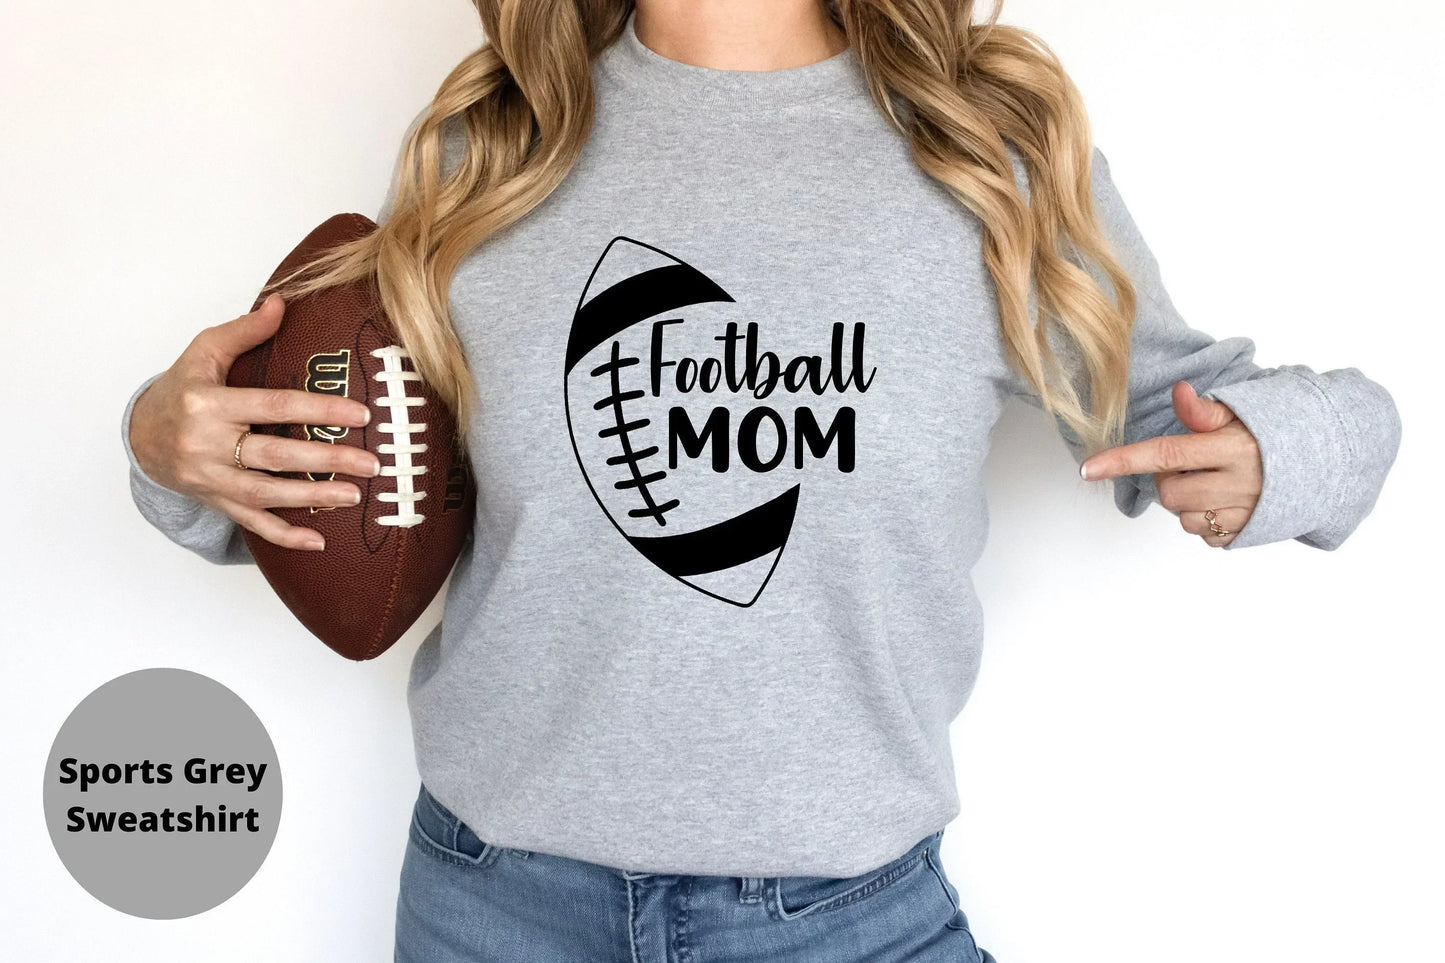 Football mom shirt, Football mom sweatshirt, Football mom hoodie, Boy Mom, Gifts for Mom, Gift for Football Mom, Presents for Mom,